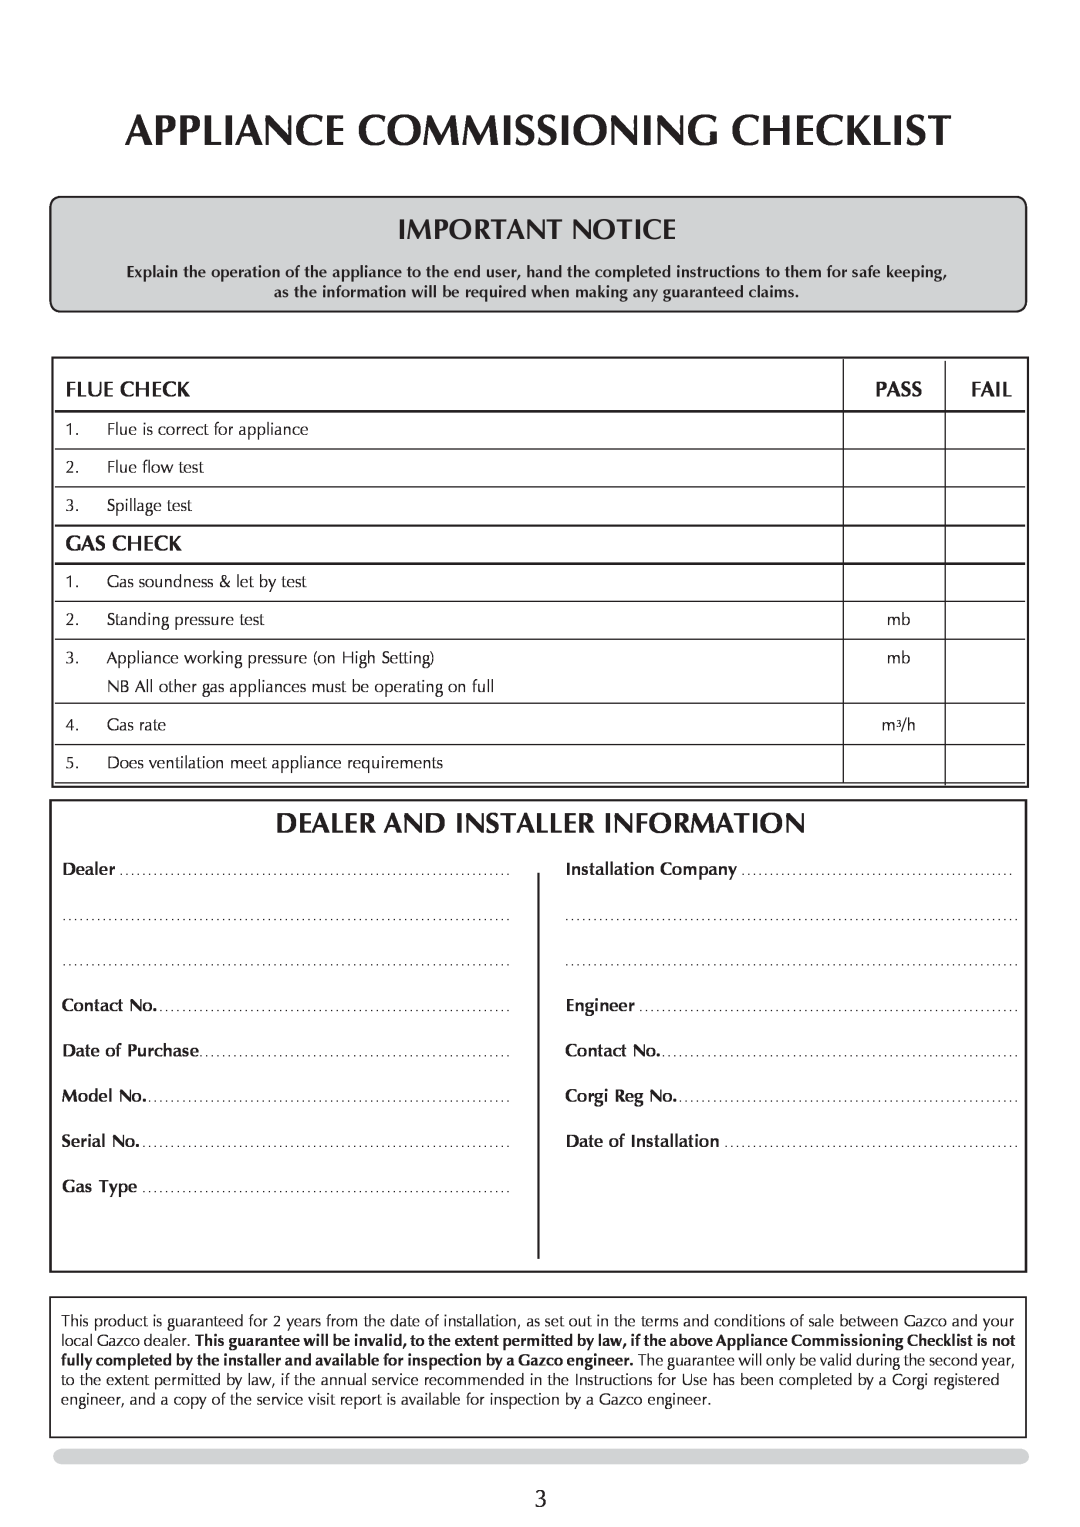 Stovax 8701CFCHEC, 8700CFCHEC Appliance Commissioning Checklist, IMPORTaNT NOTICE, Dealer And Installer Information, Pass 